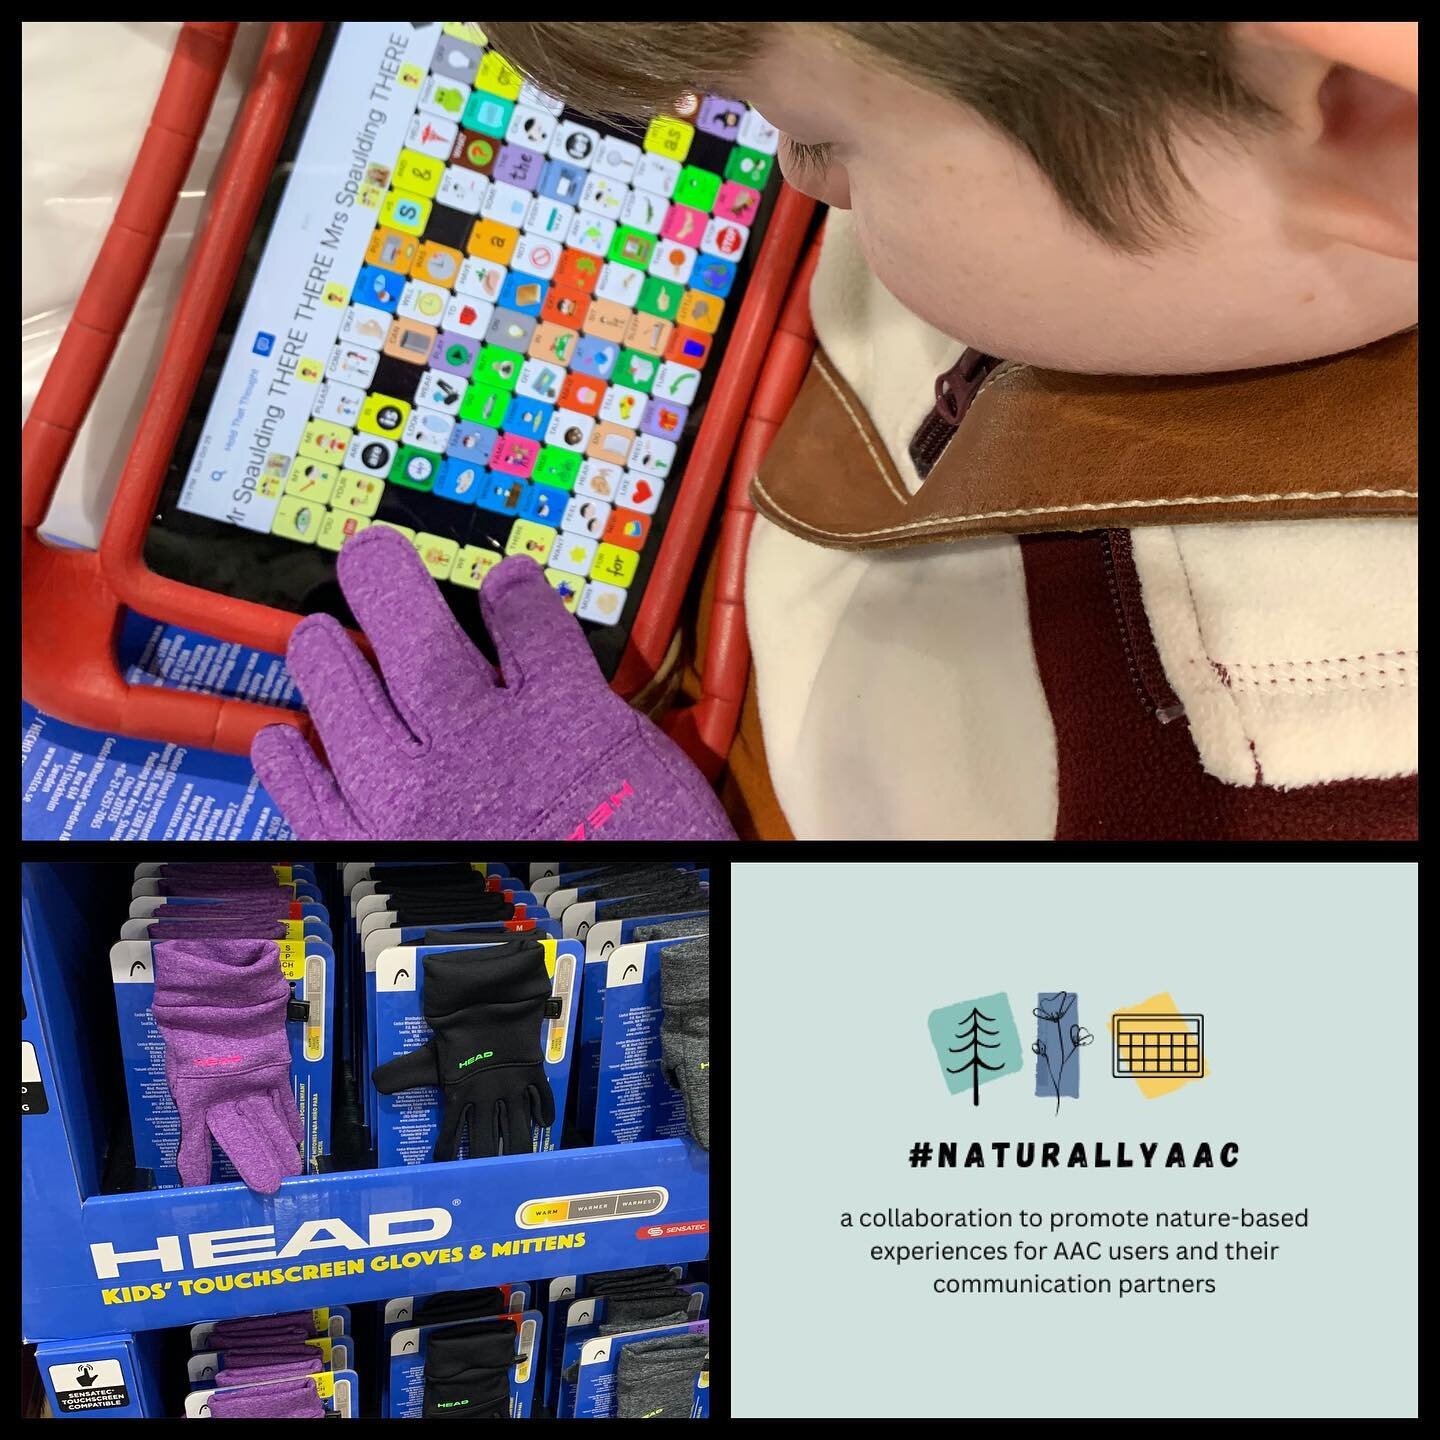 Not all touchscreen gloves are equal. We&rsquo;ve bought quite a few pairs that just don&rsquo;t work. Head brand now being sold at Costco worked well for Nathaniel. There are adult sizes for parents for modeling too. 
#naturallyaac